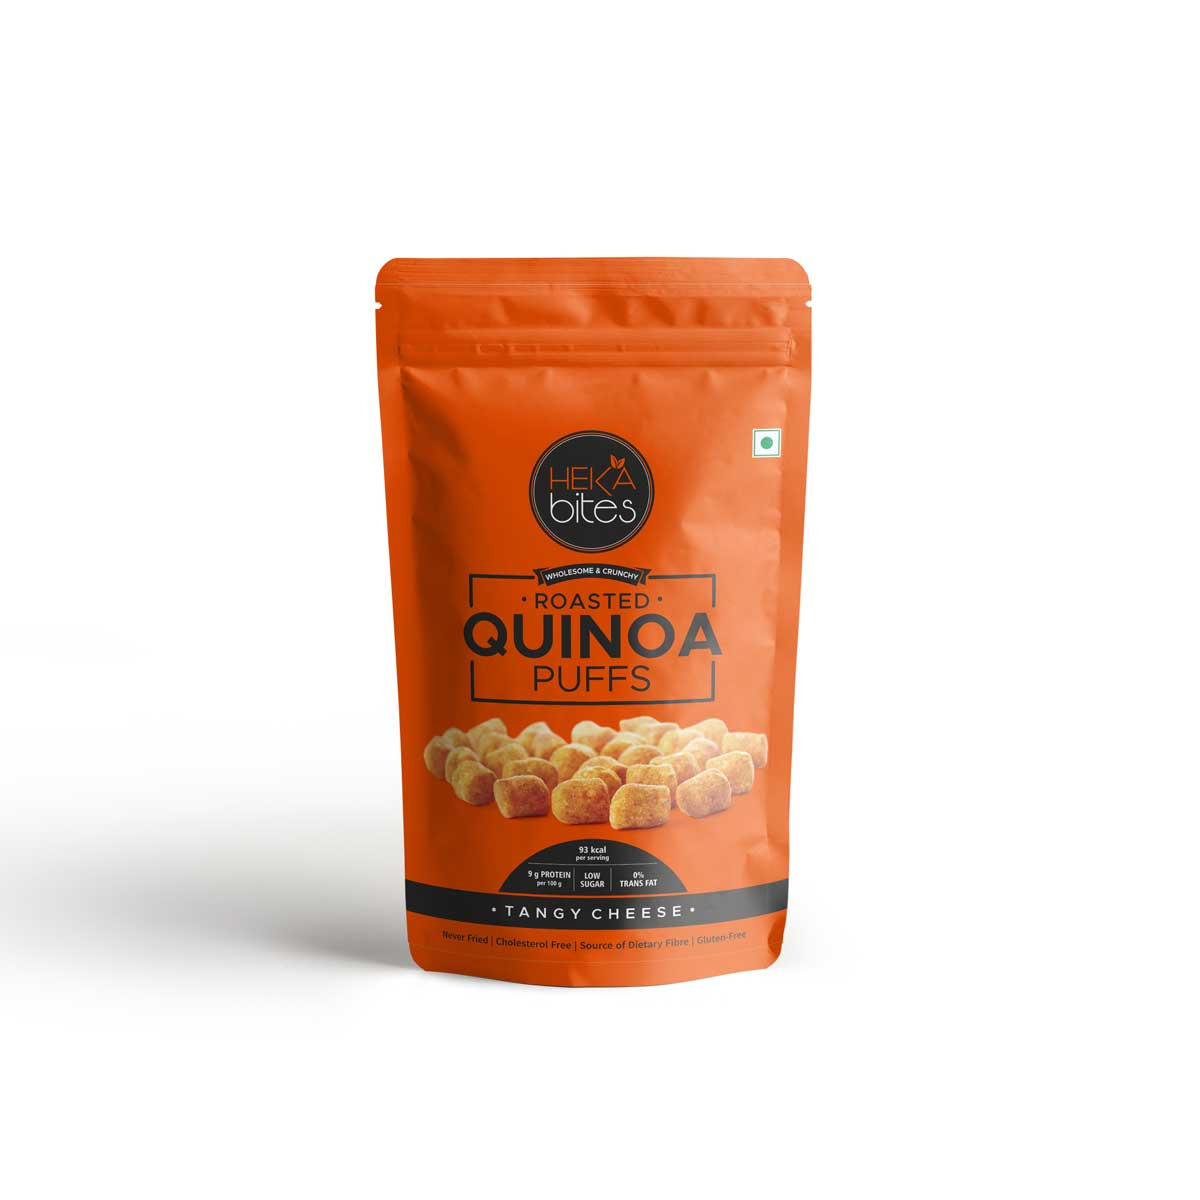 Quinoa Puffs - Tangy Cheese (1 Pack of 35 grams)